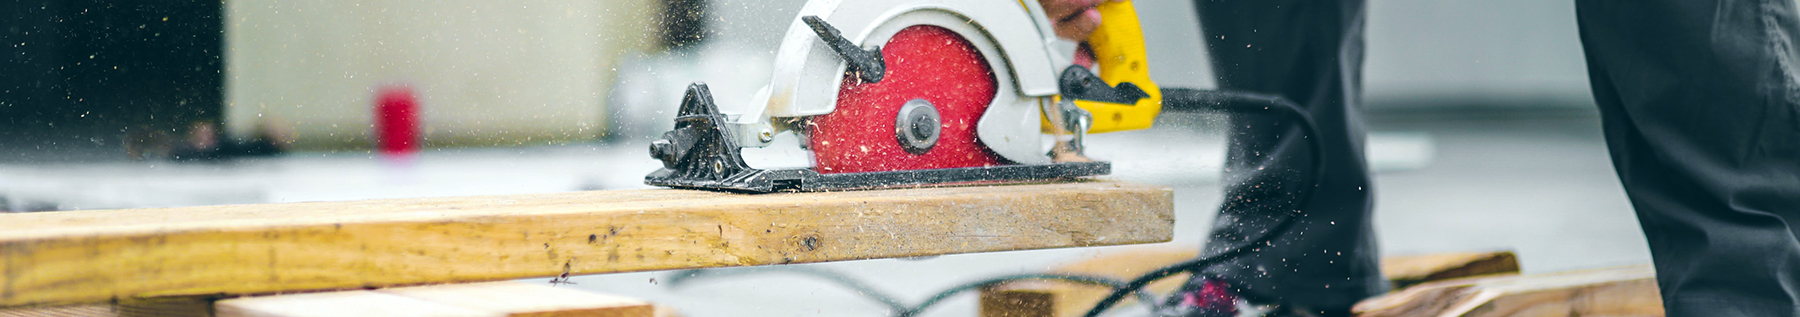 cutting wood with saw